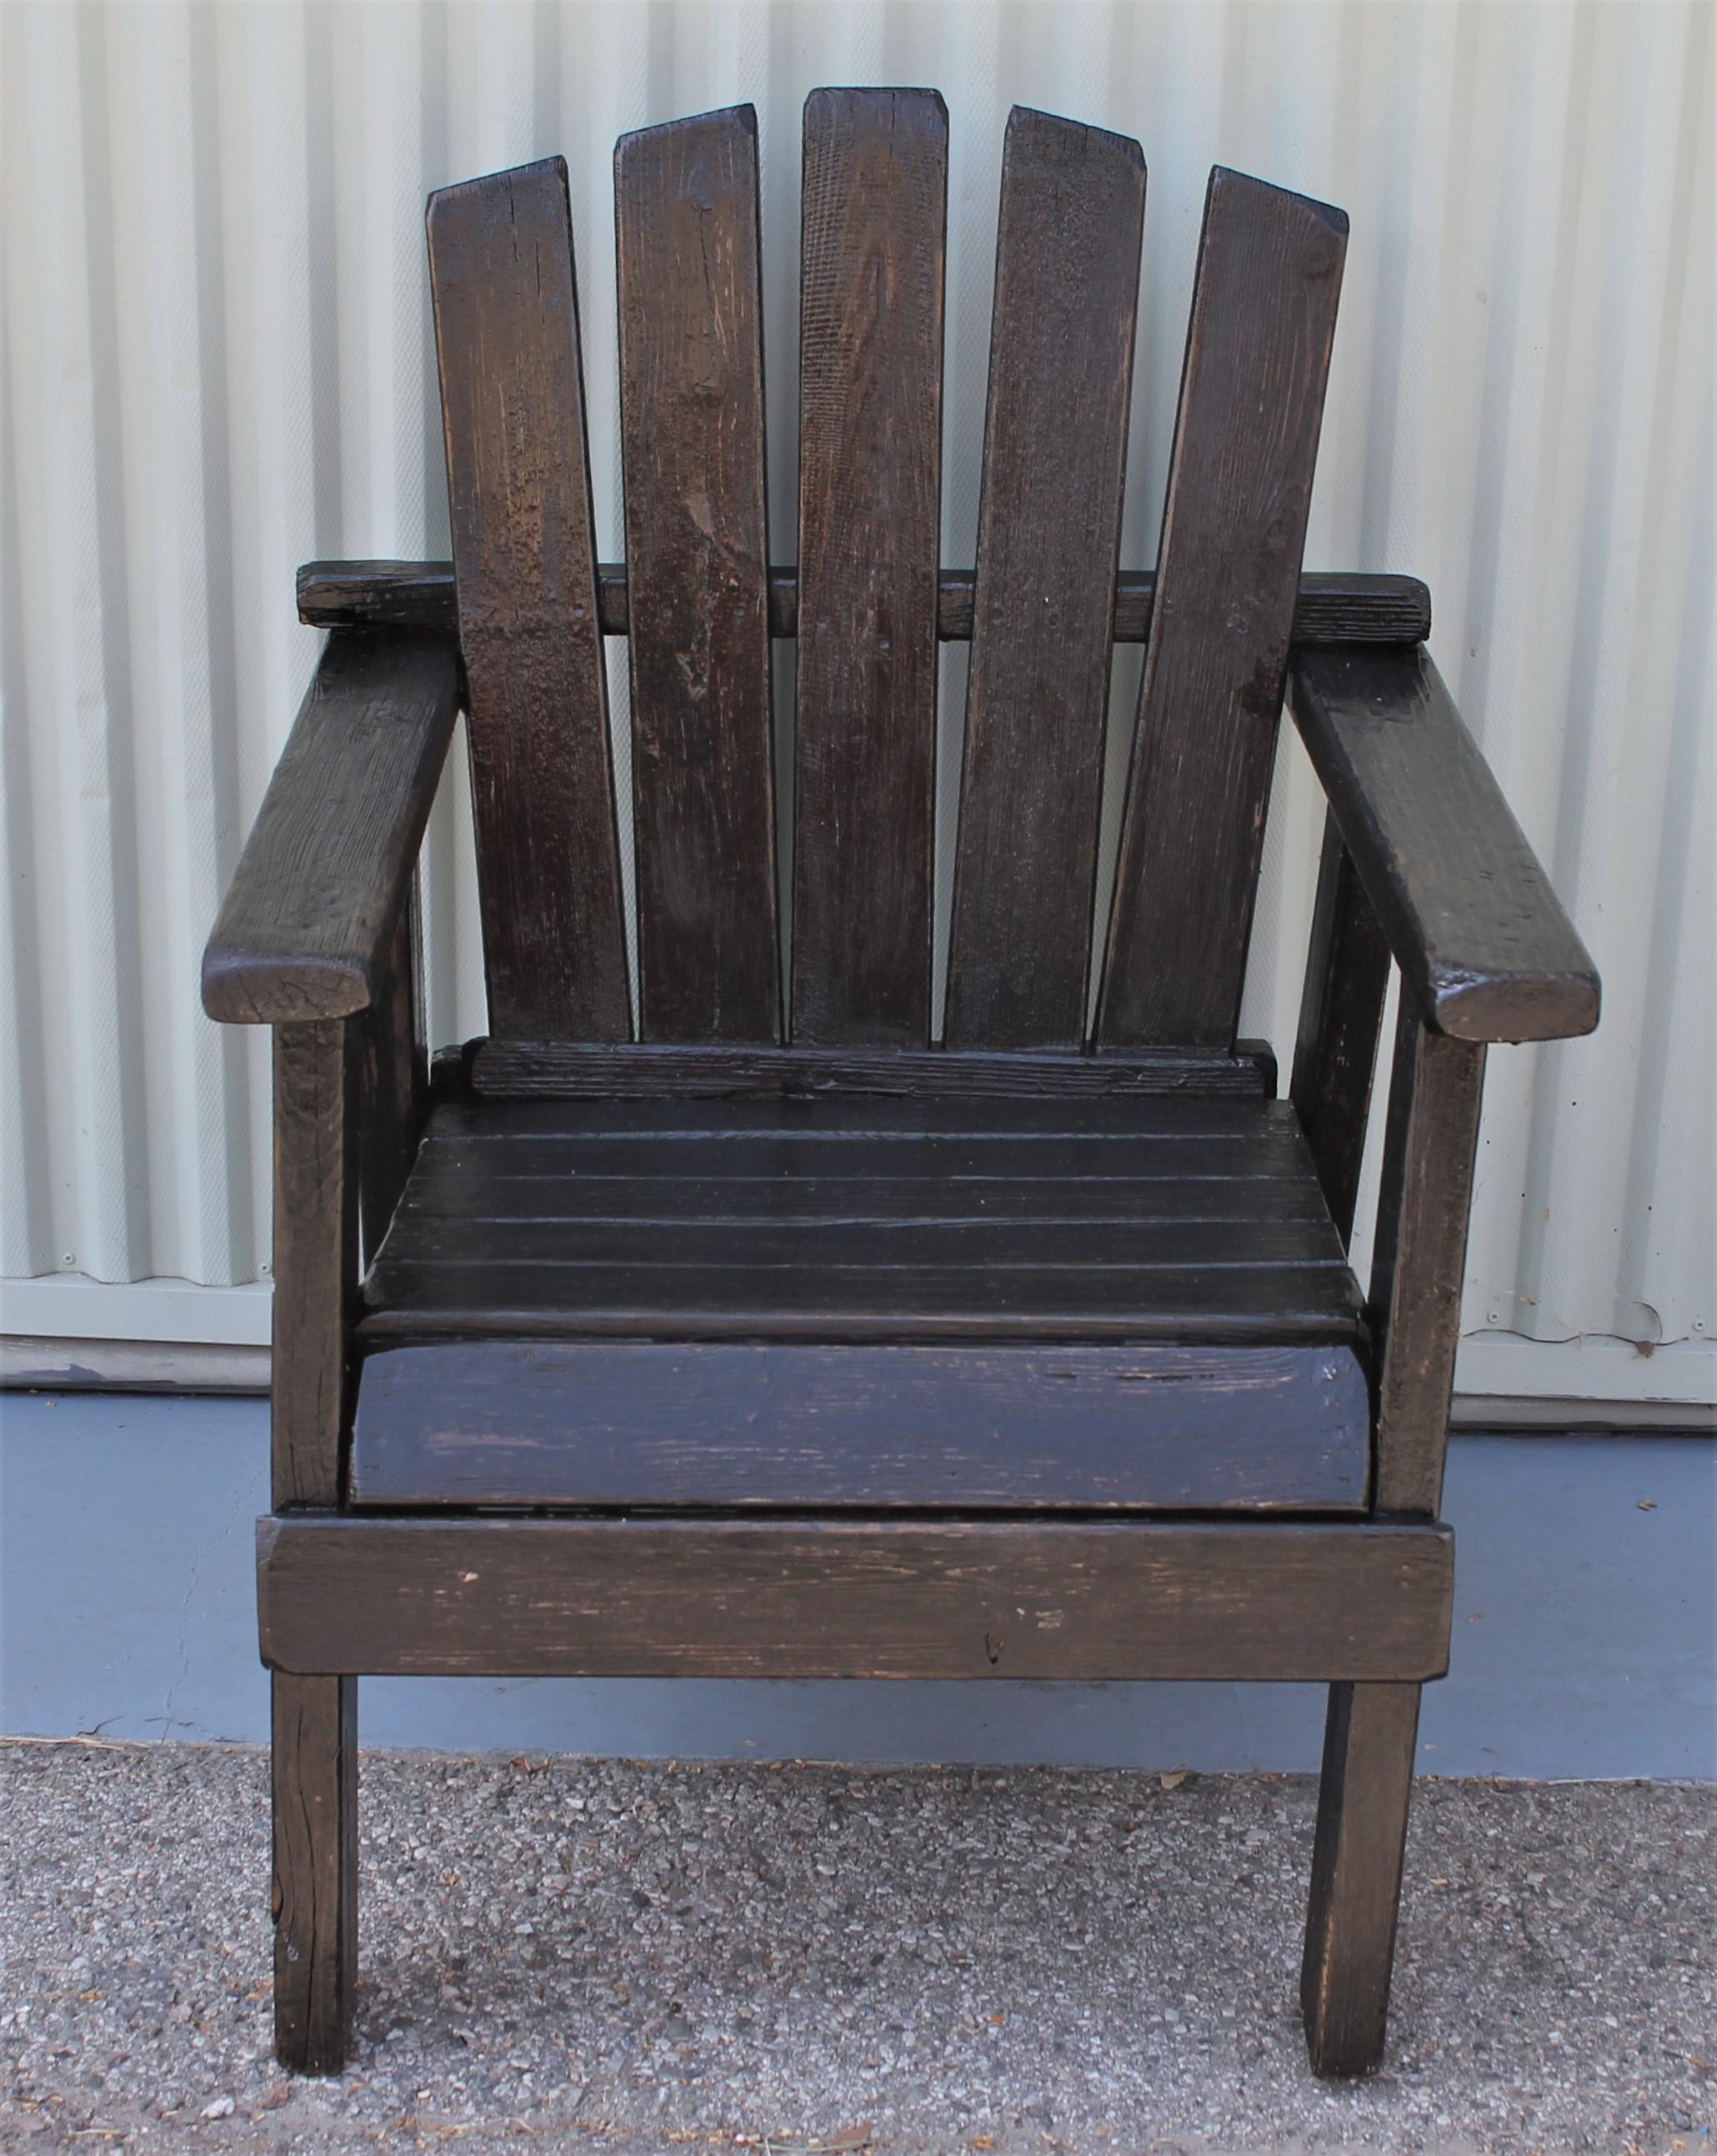 Wood 20th Century Adirondack Black Painted Patio Chair and Bench